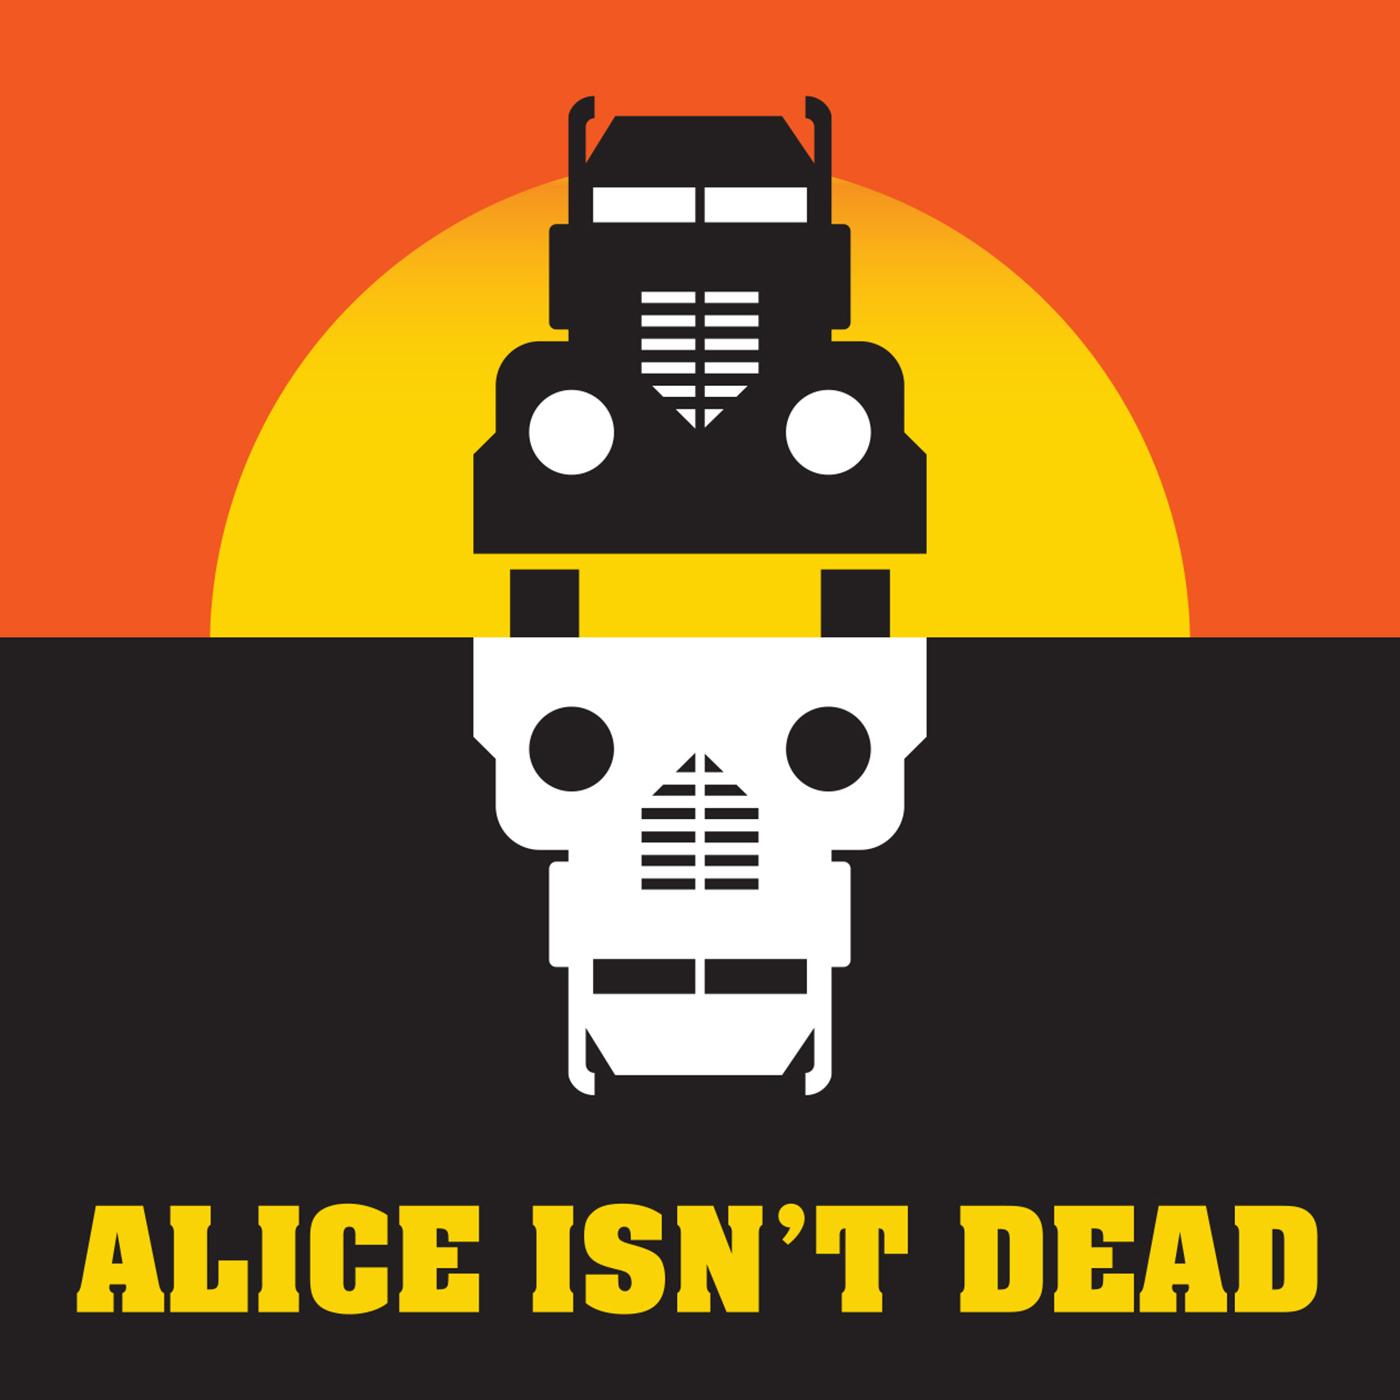 Thumbnail for "Alice Isn't Dead returns for one night only!".